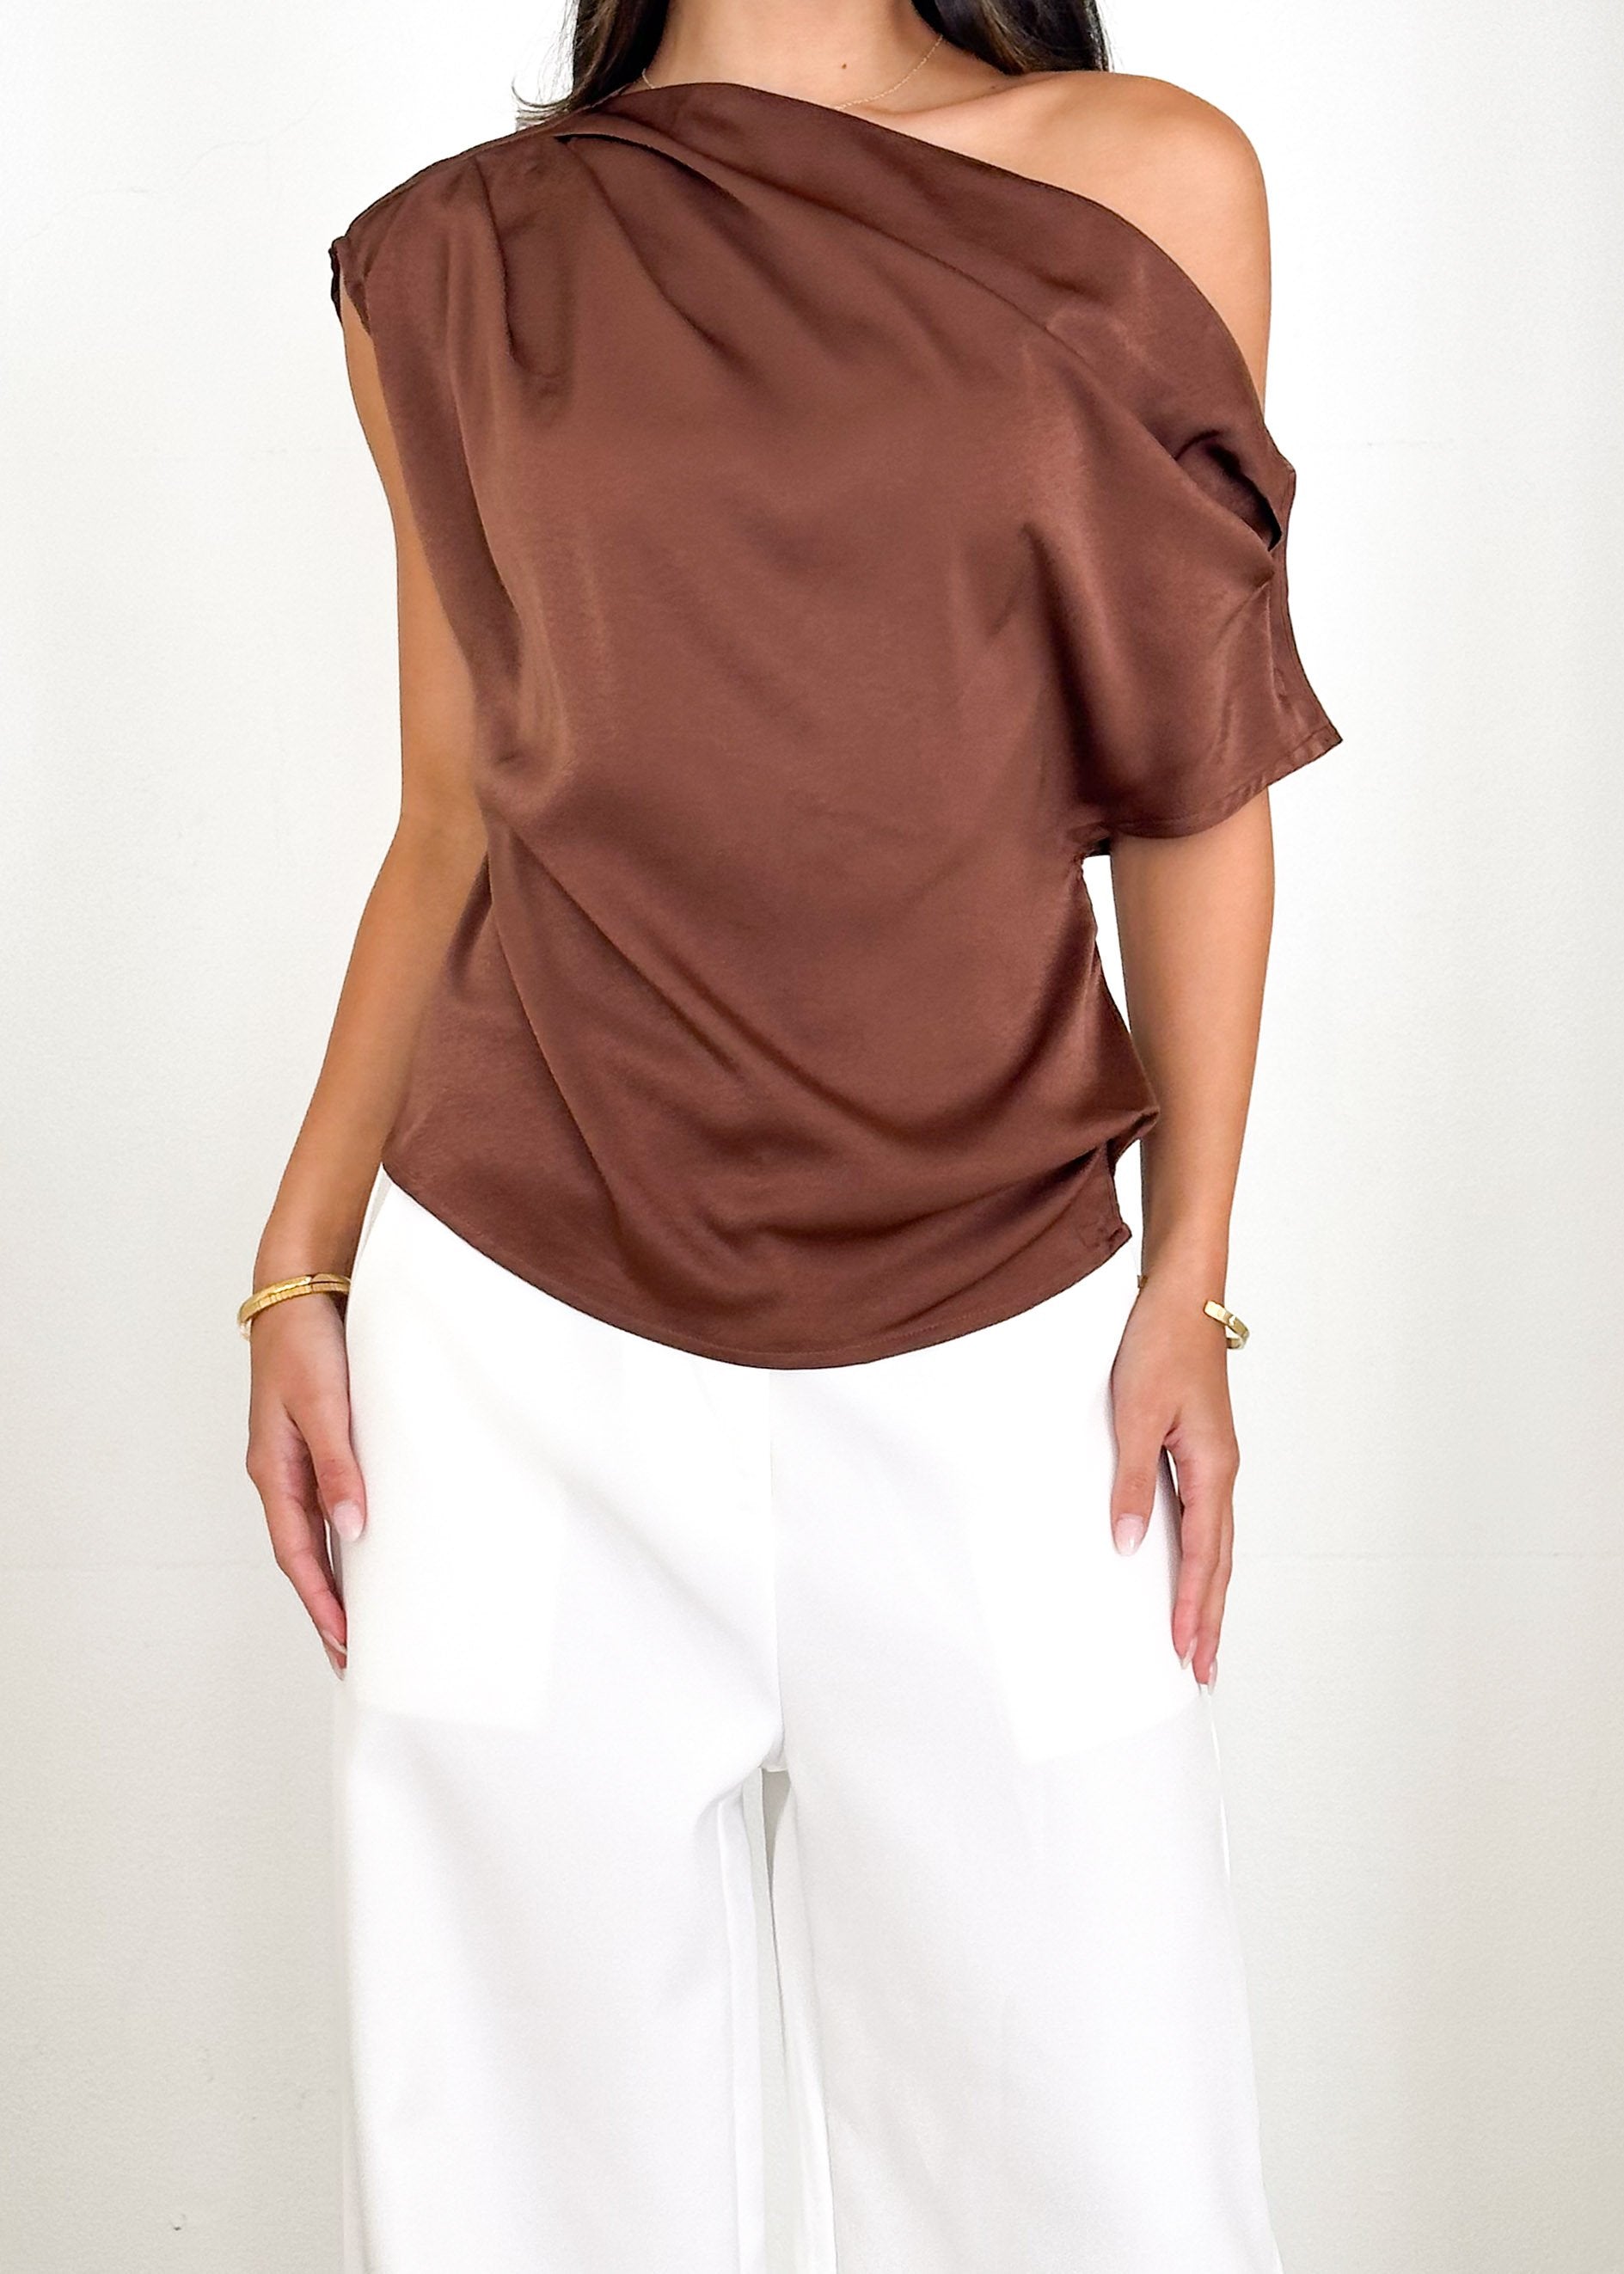 Isstra One Shoulder Top - Chocolate